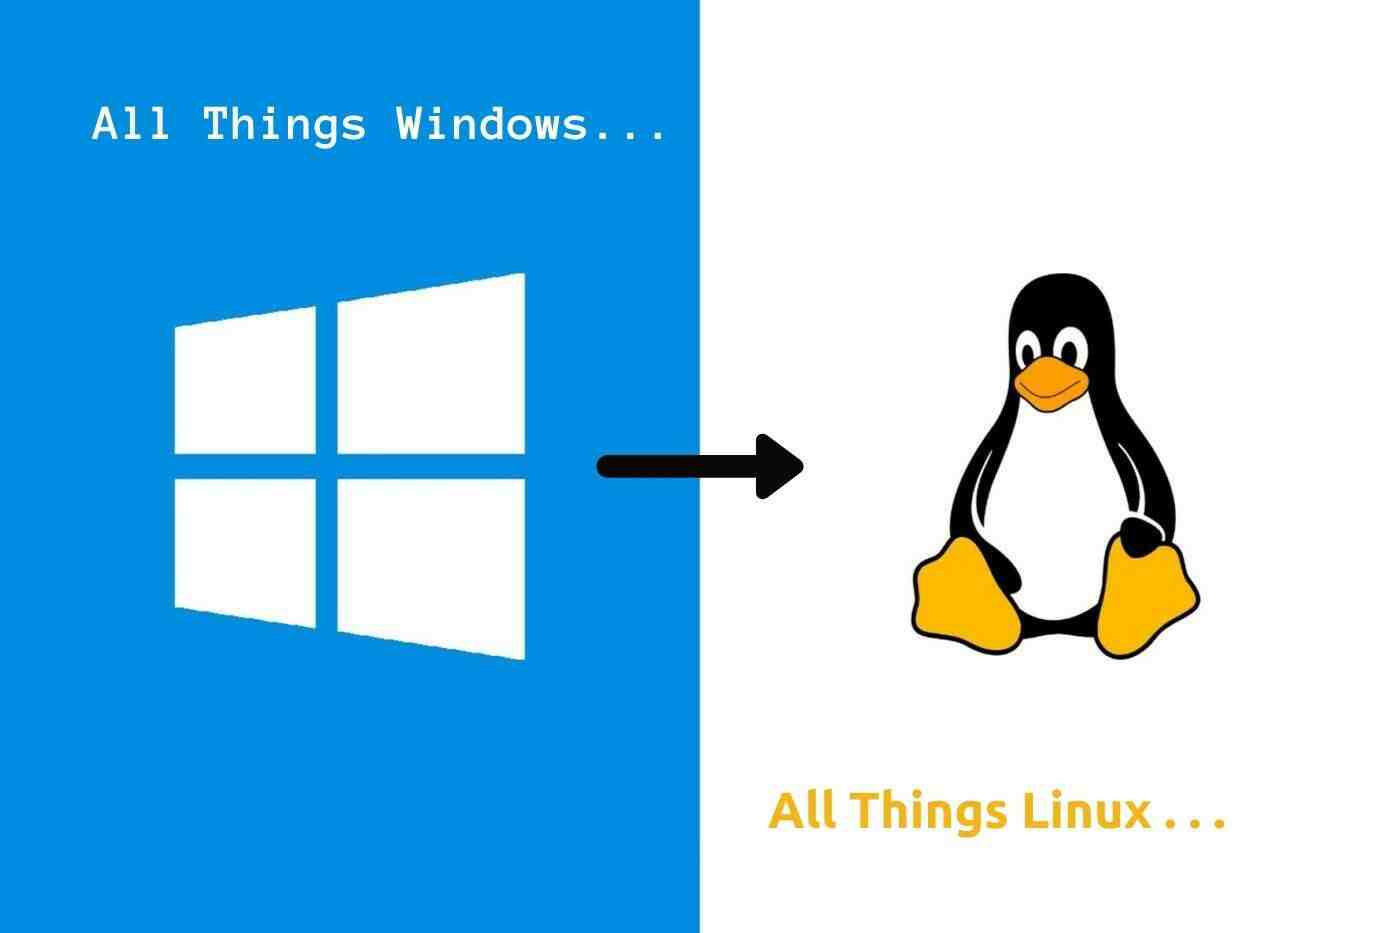 Why did you switch to Linux?